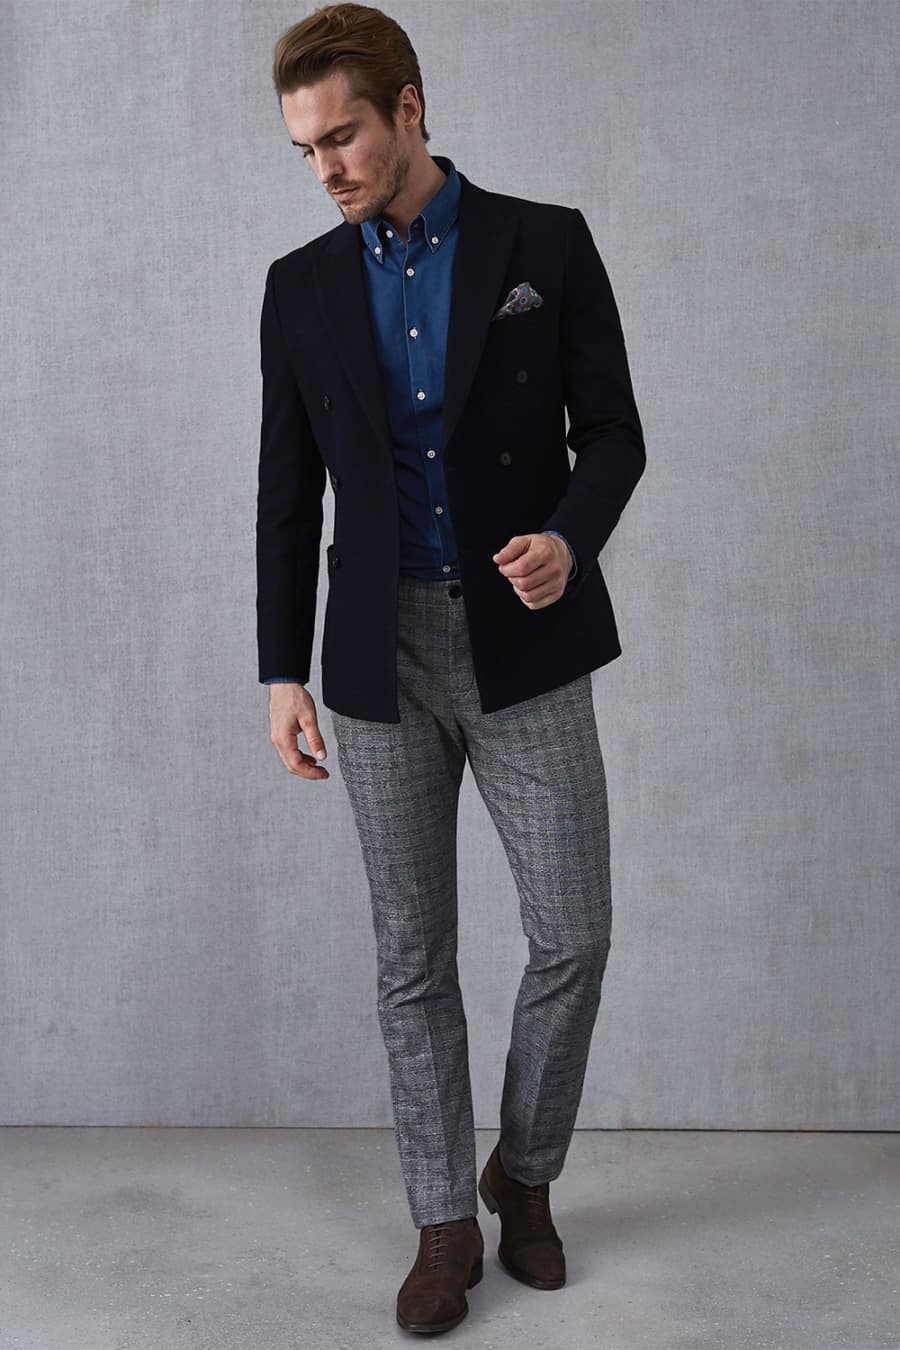 Men's plaid pants, blue Oxford shirt, navy double breasted blazer and suede shoes outfit